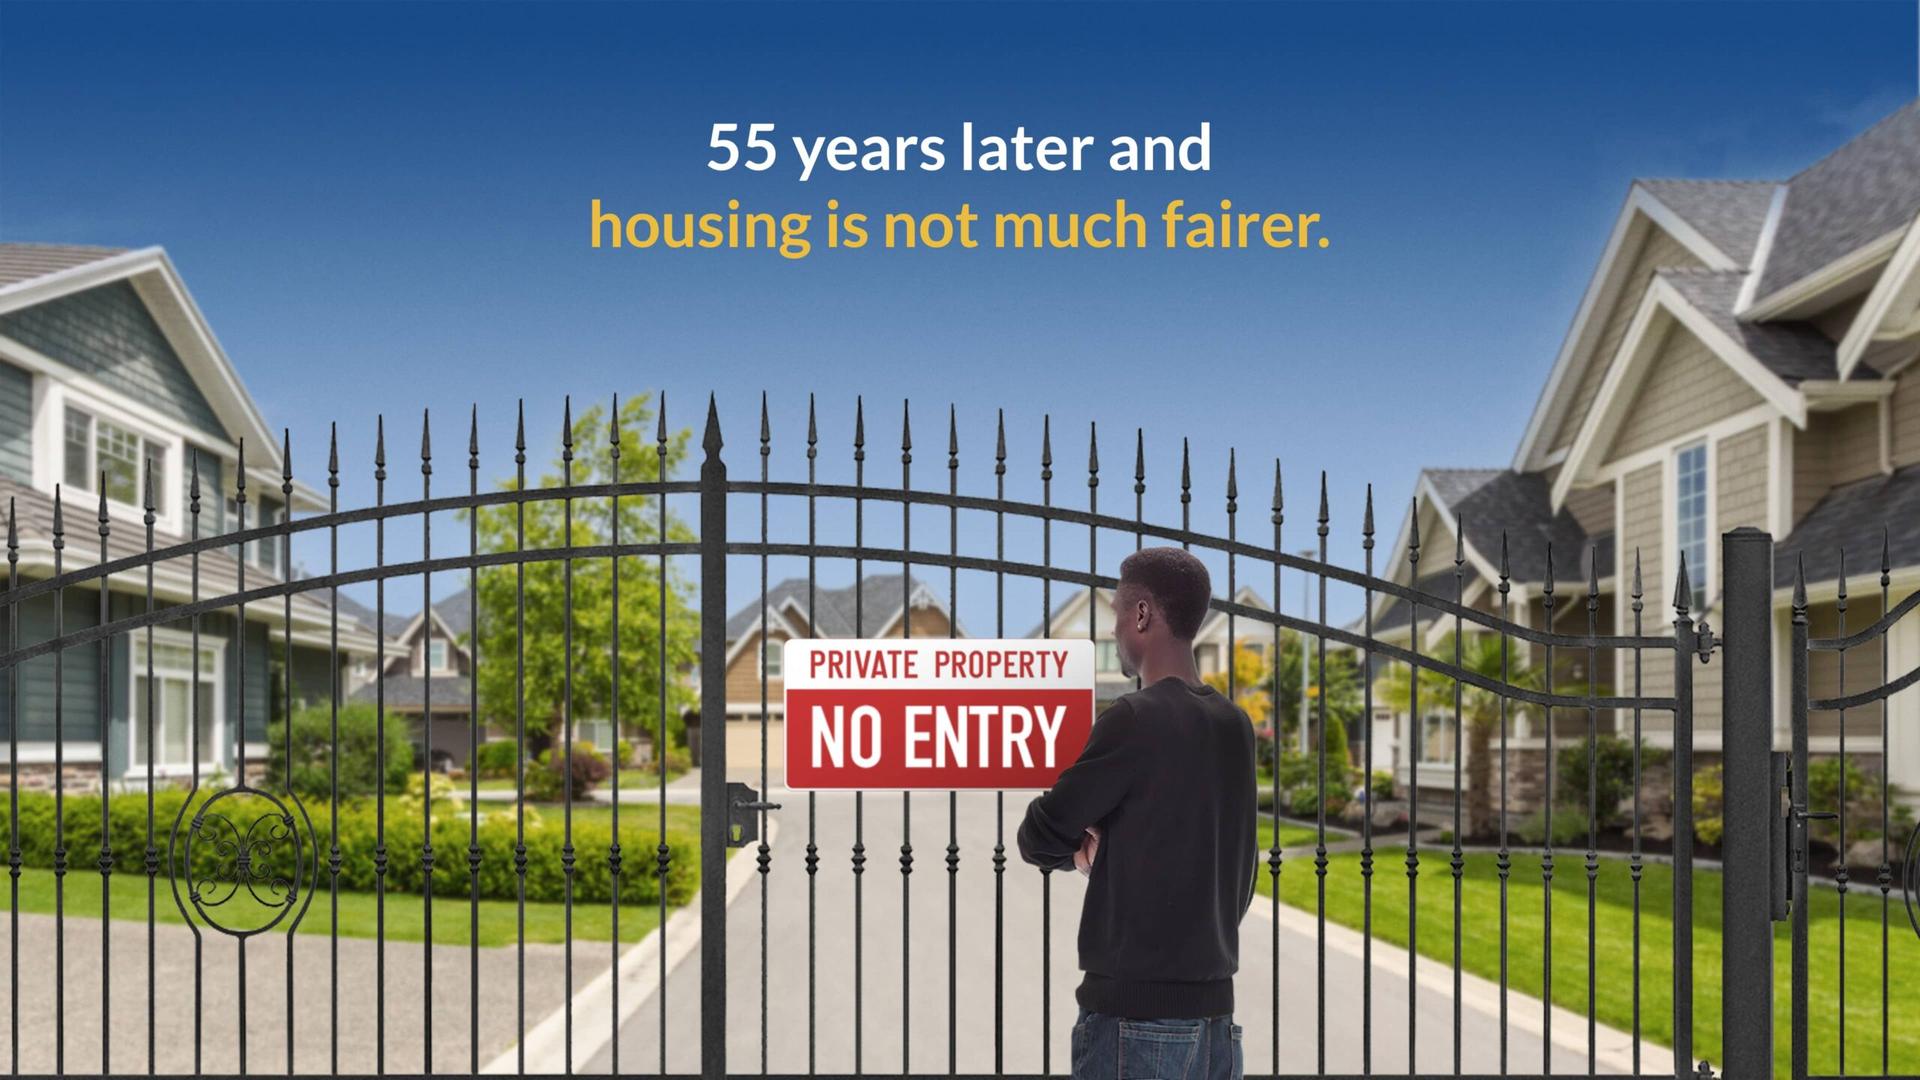 55 years later and housing is not much fairer